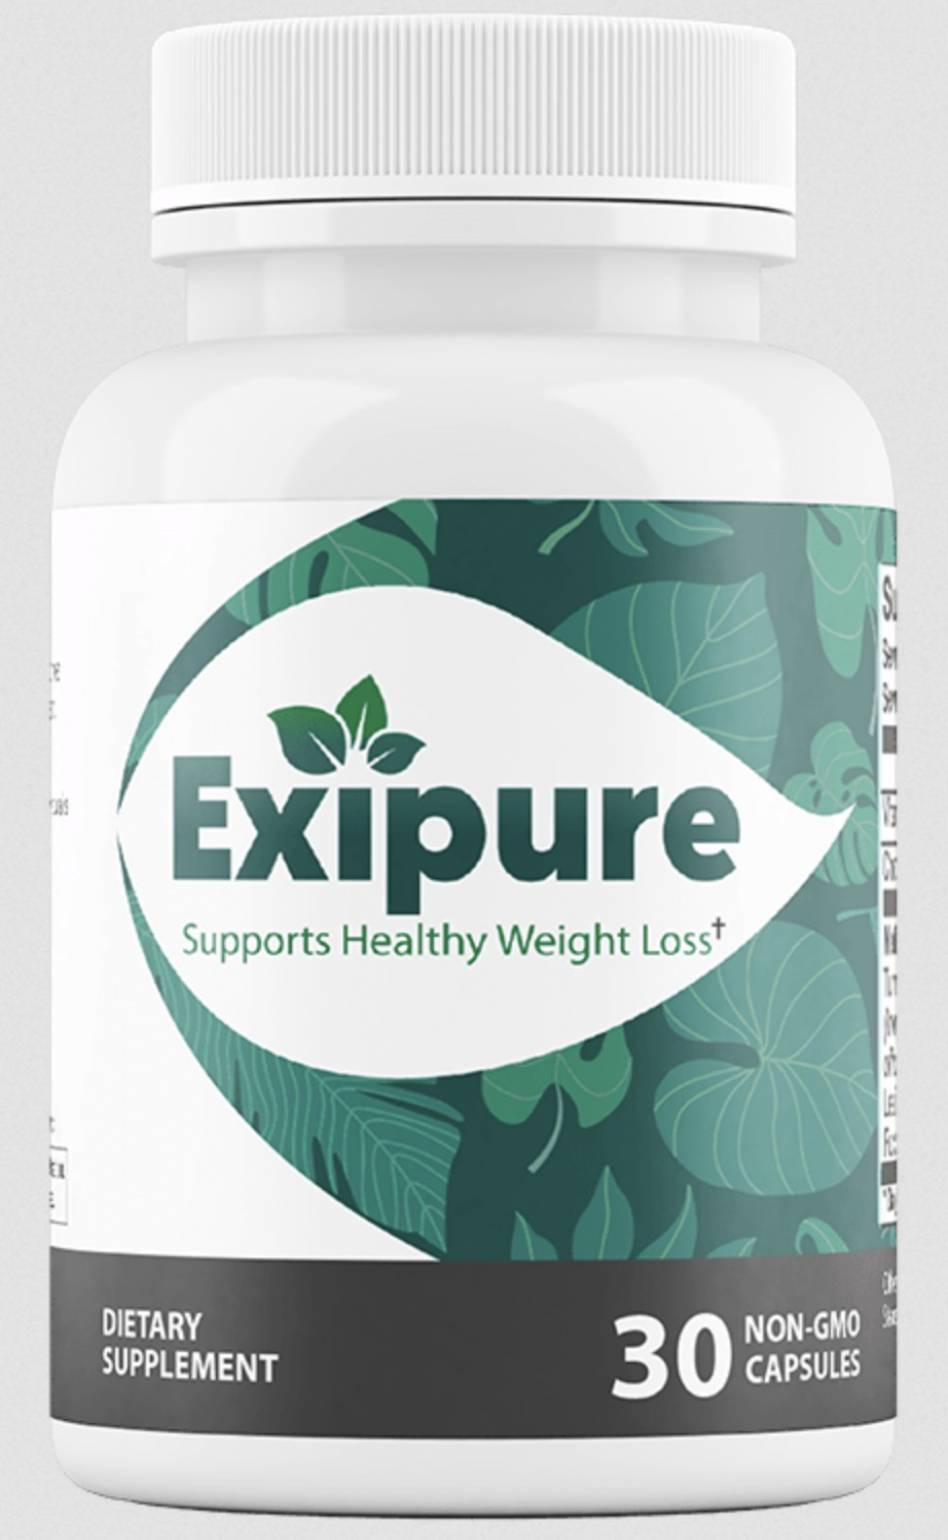 How Good Is Exipure